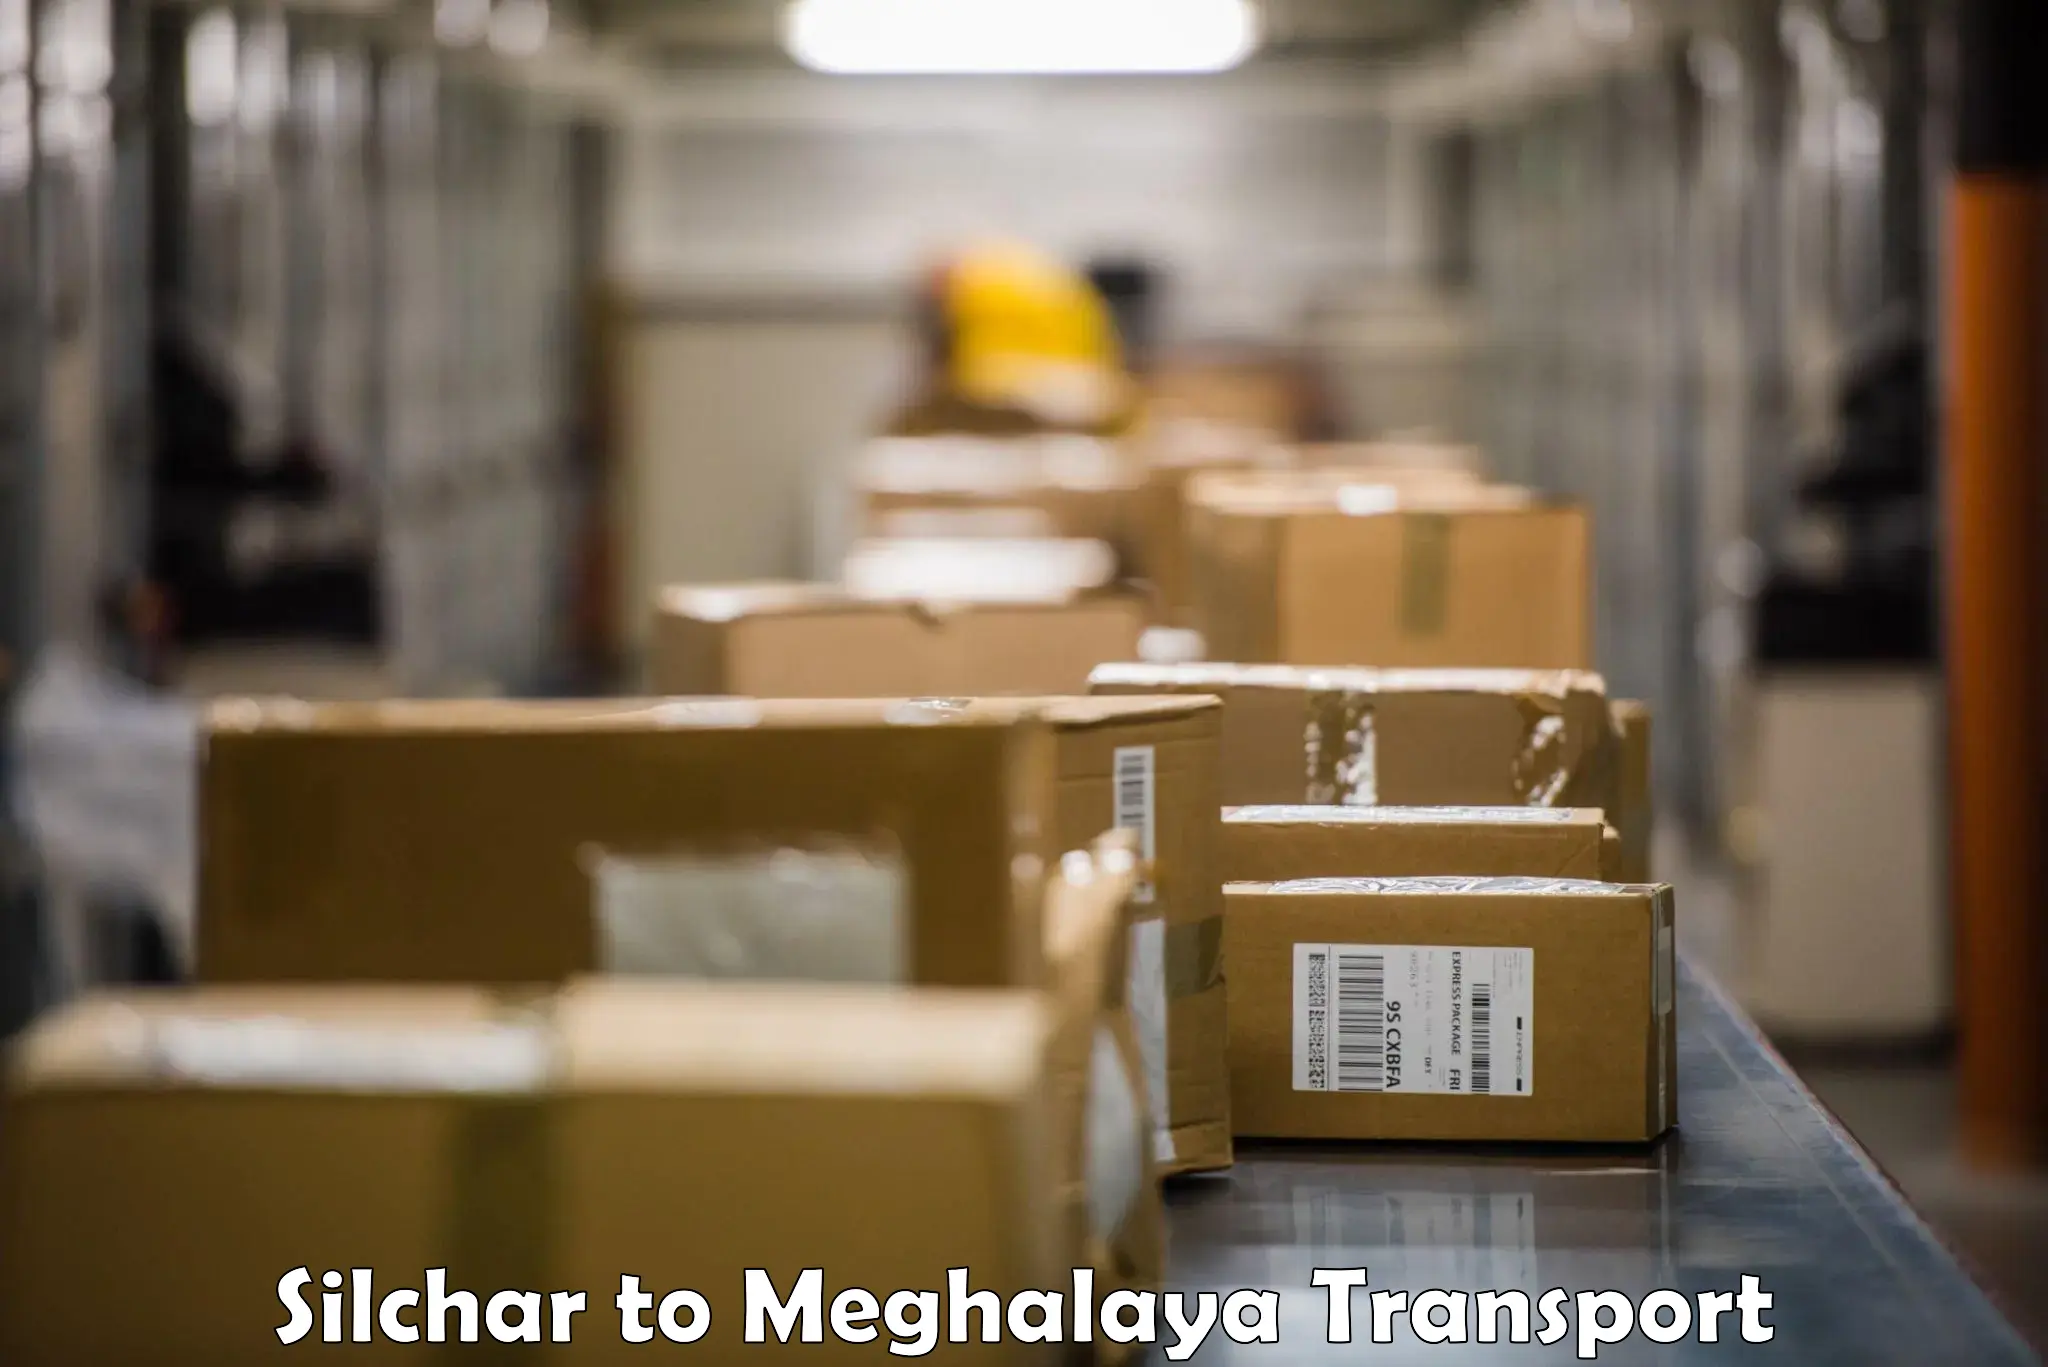 Parcel transport services Silchar to Jowai